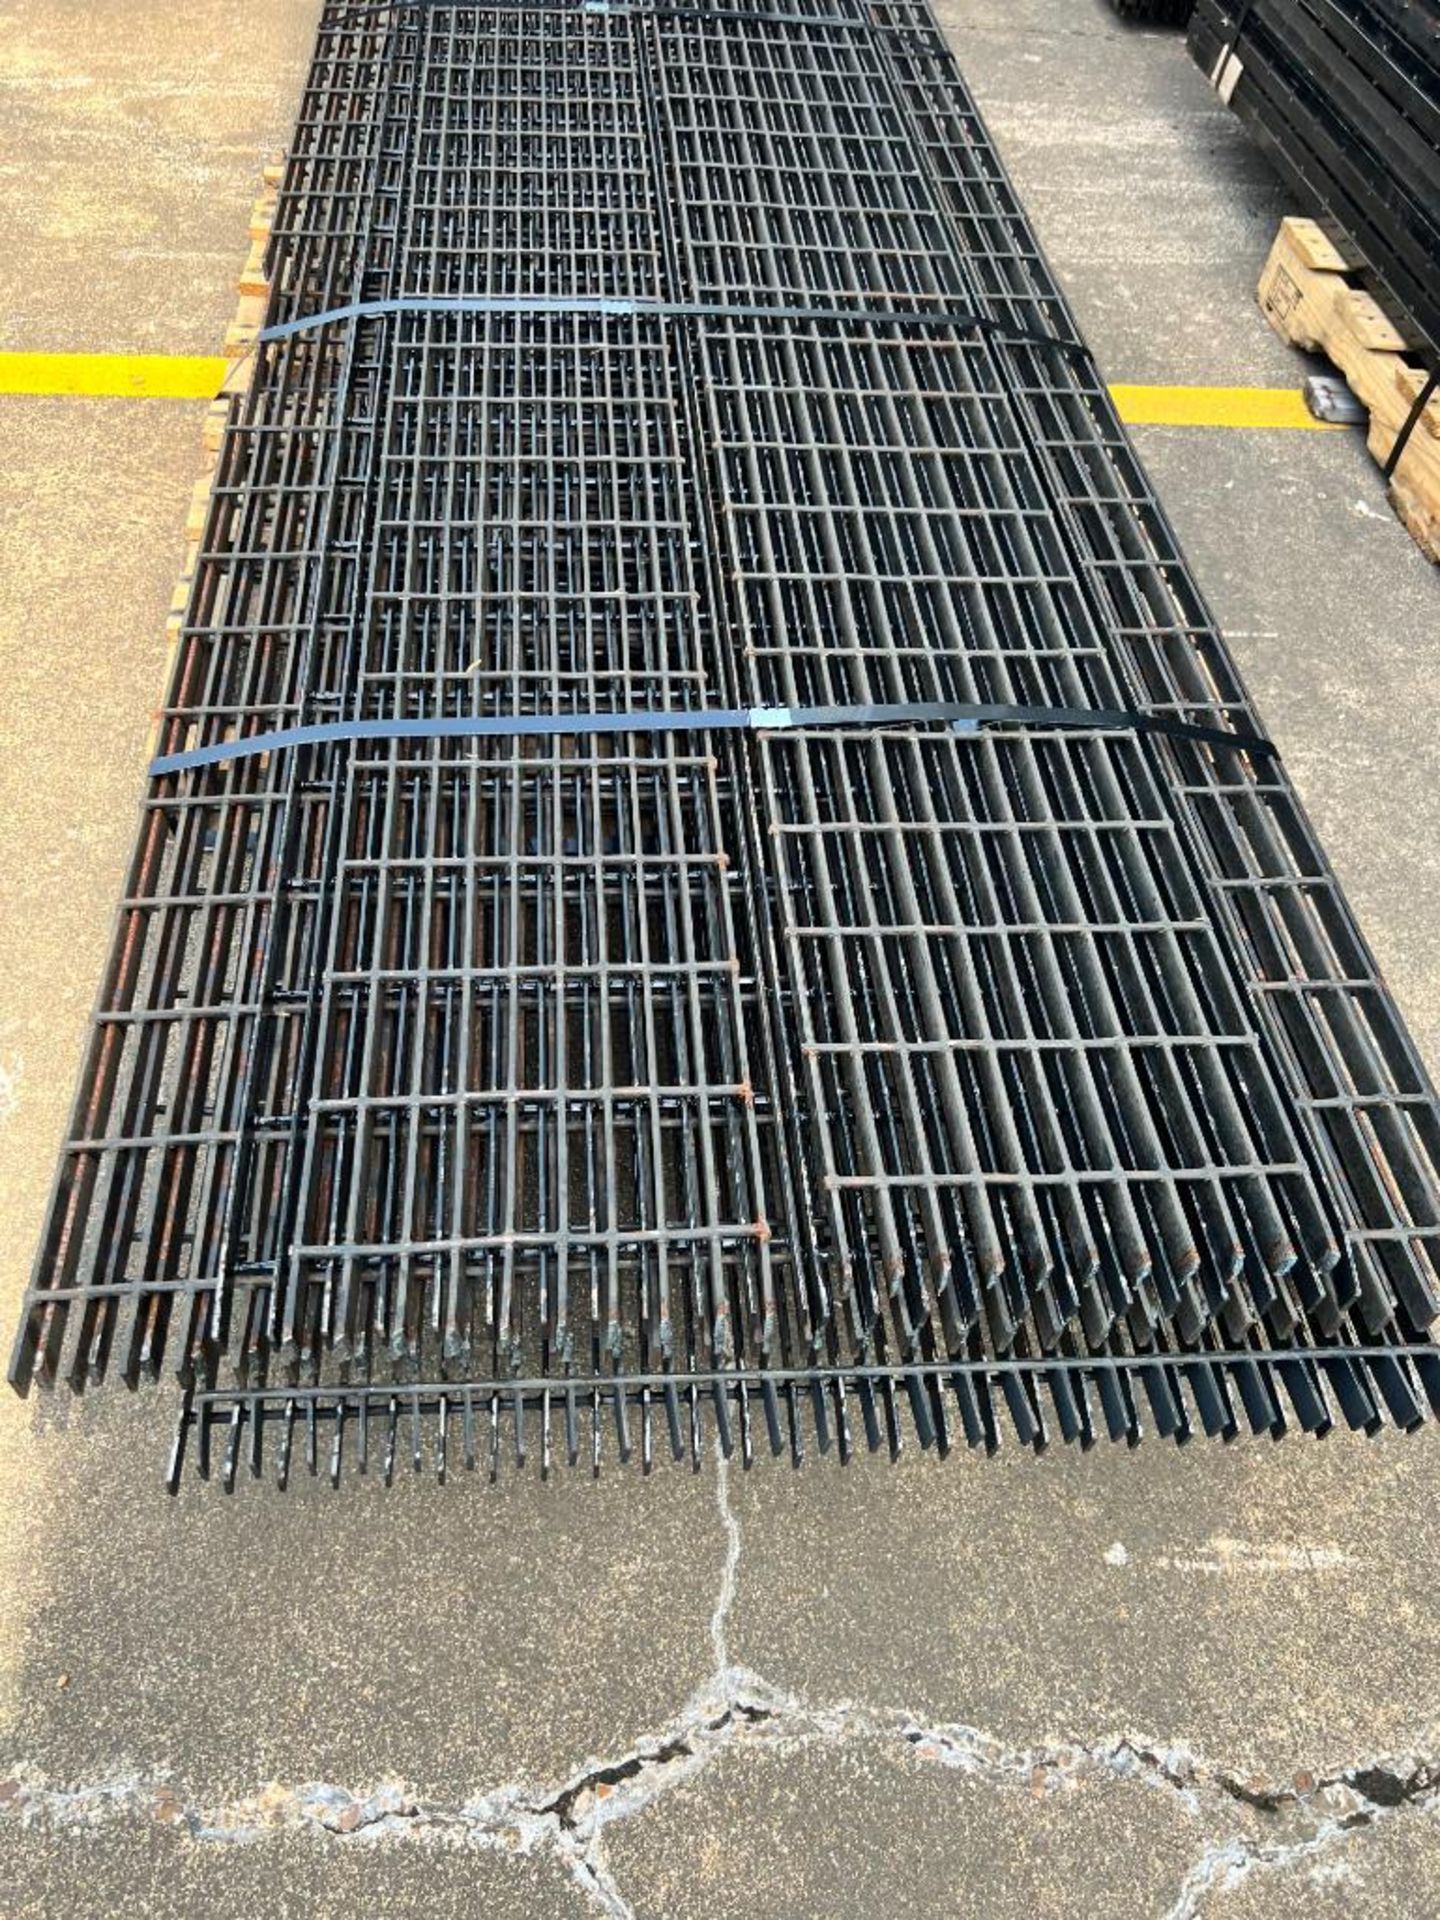 Metal Grates in Assorted Sizes ($50 Loading fee will be added to buyers invoice) - Image 2 of 3